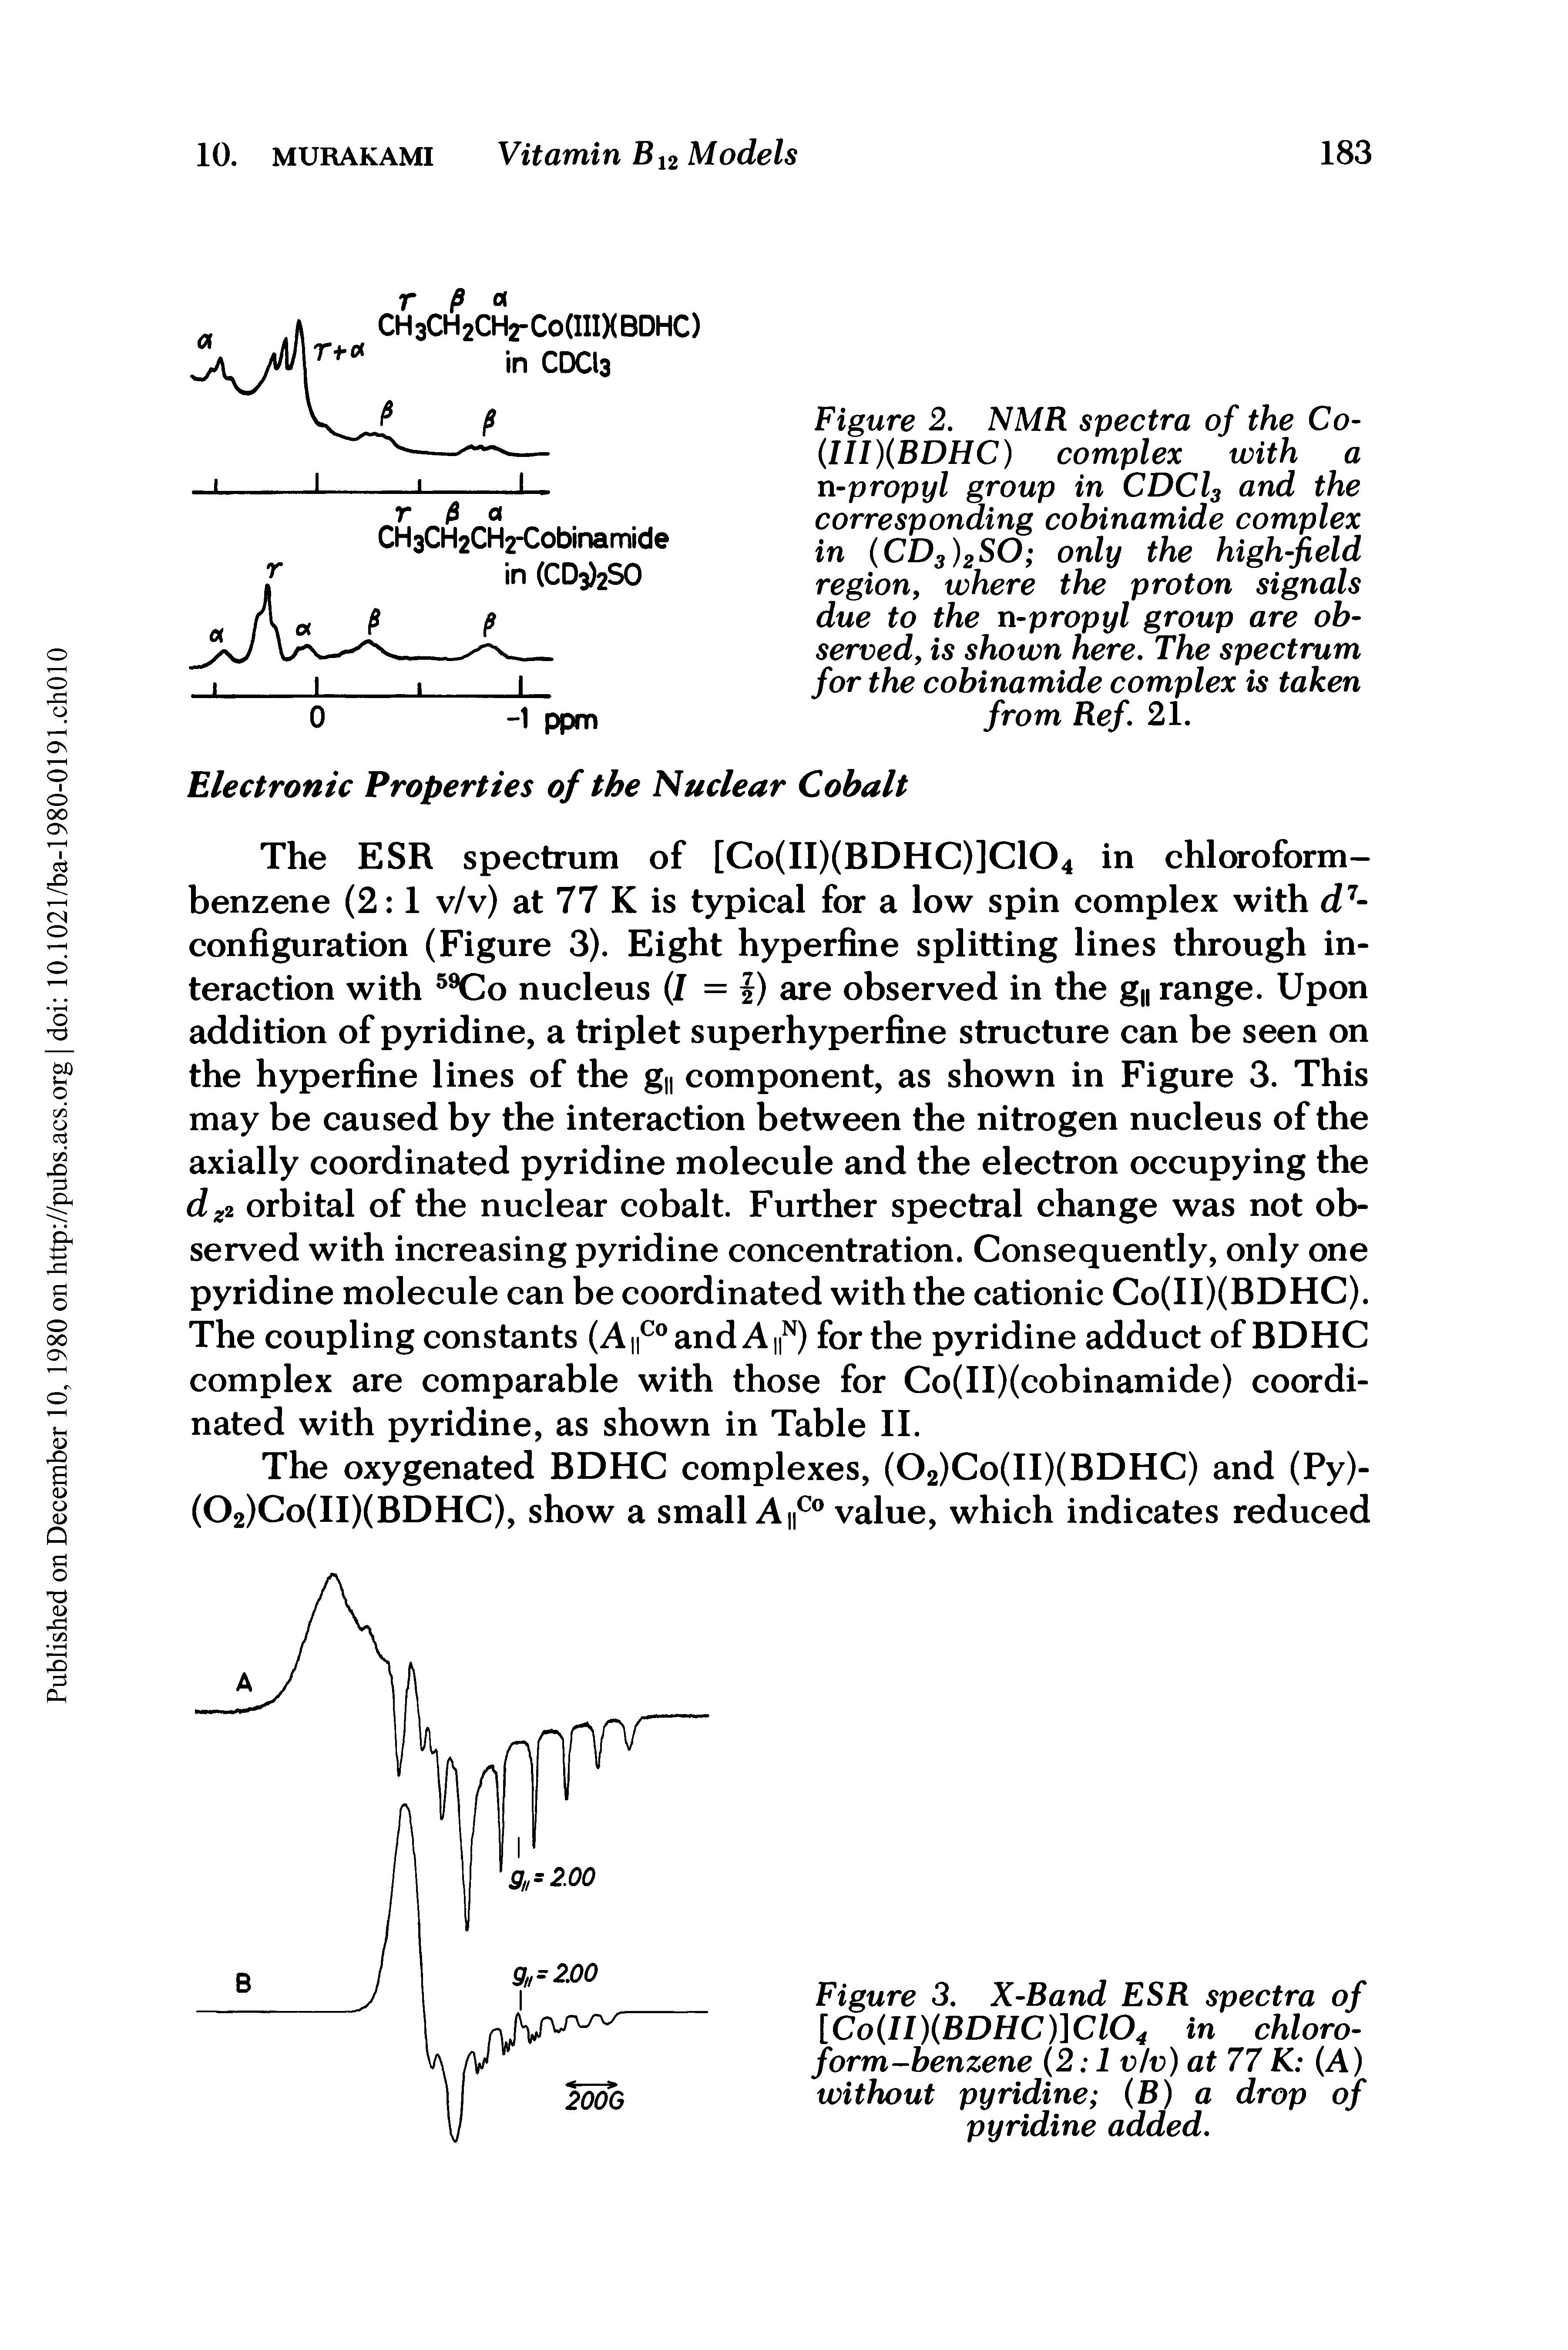 Figure 2. NMR spectra of the Co-(III)(BDHC) complex with a n-propyl group in CDCl3 and the corresponding cobinamide complex in (CD3)2SO only the high-field region, where the proton signals due to the n-propyl group are observed, is shown here. The spectrum for the cobinamide complex is taken...